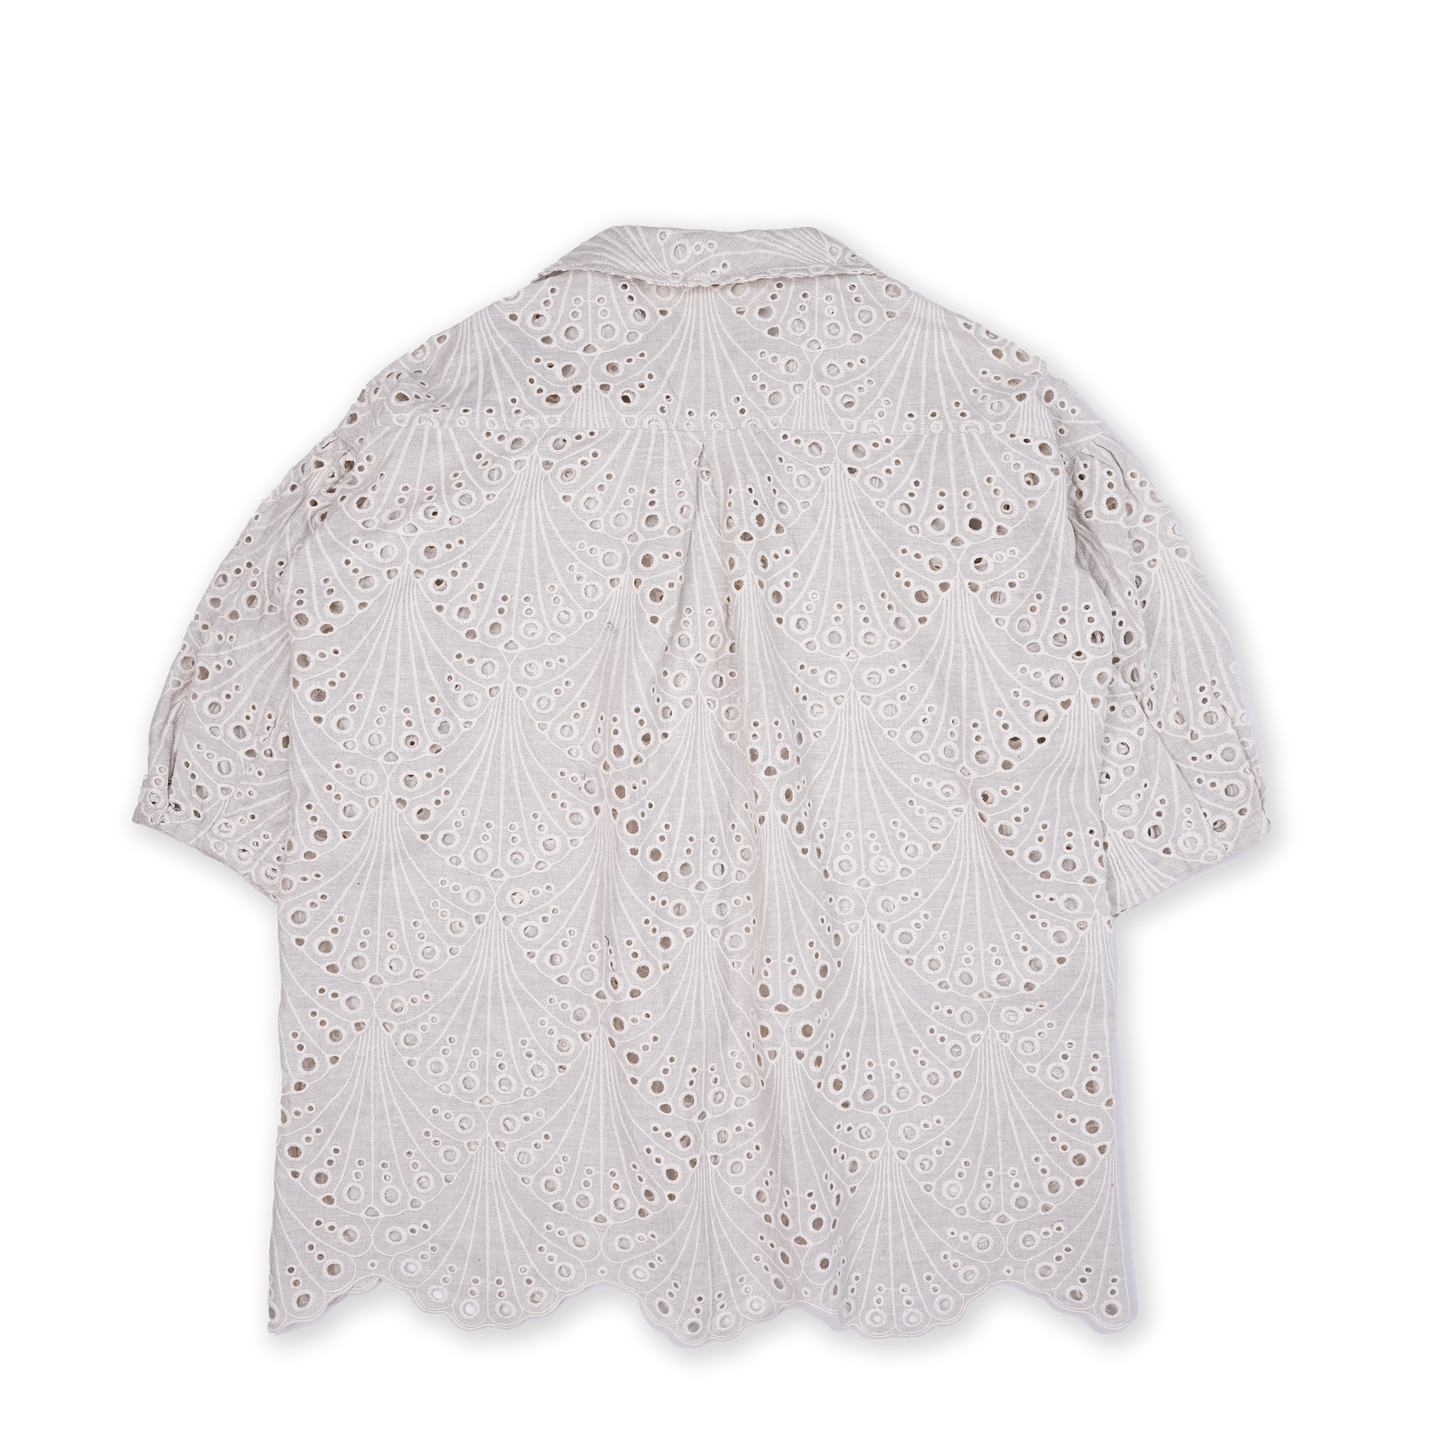 Middy Blouse Shell Lace Beige - MATA CLOTHiER